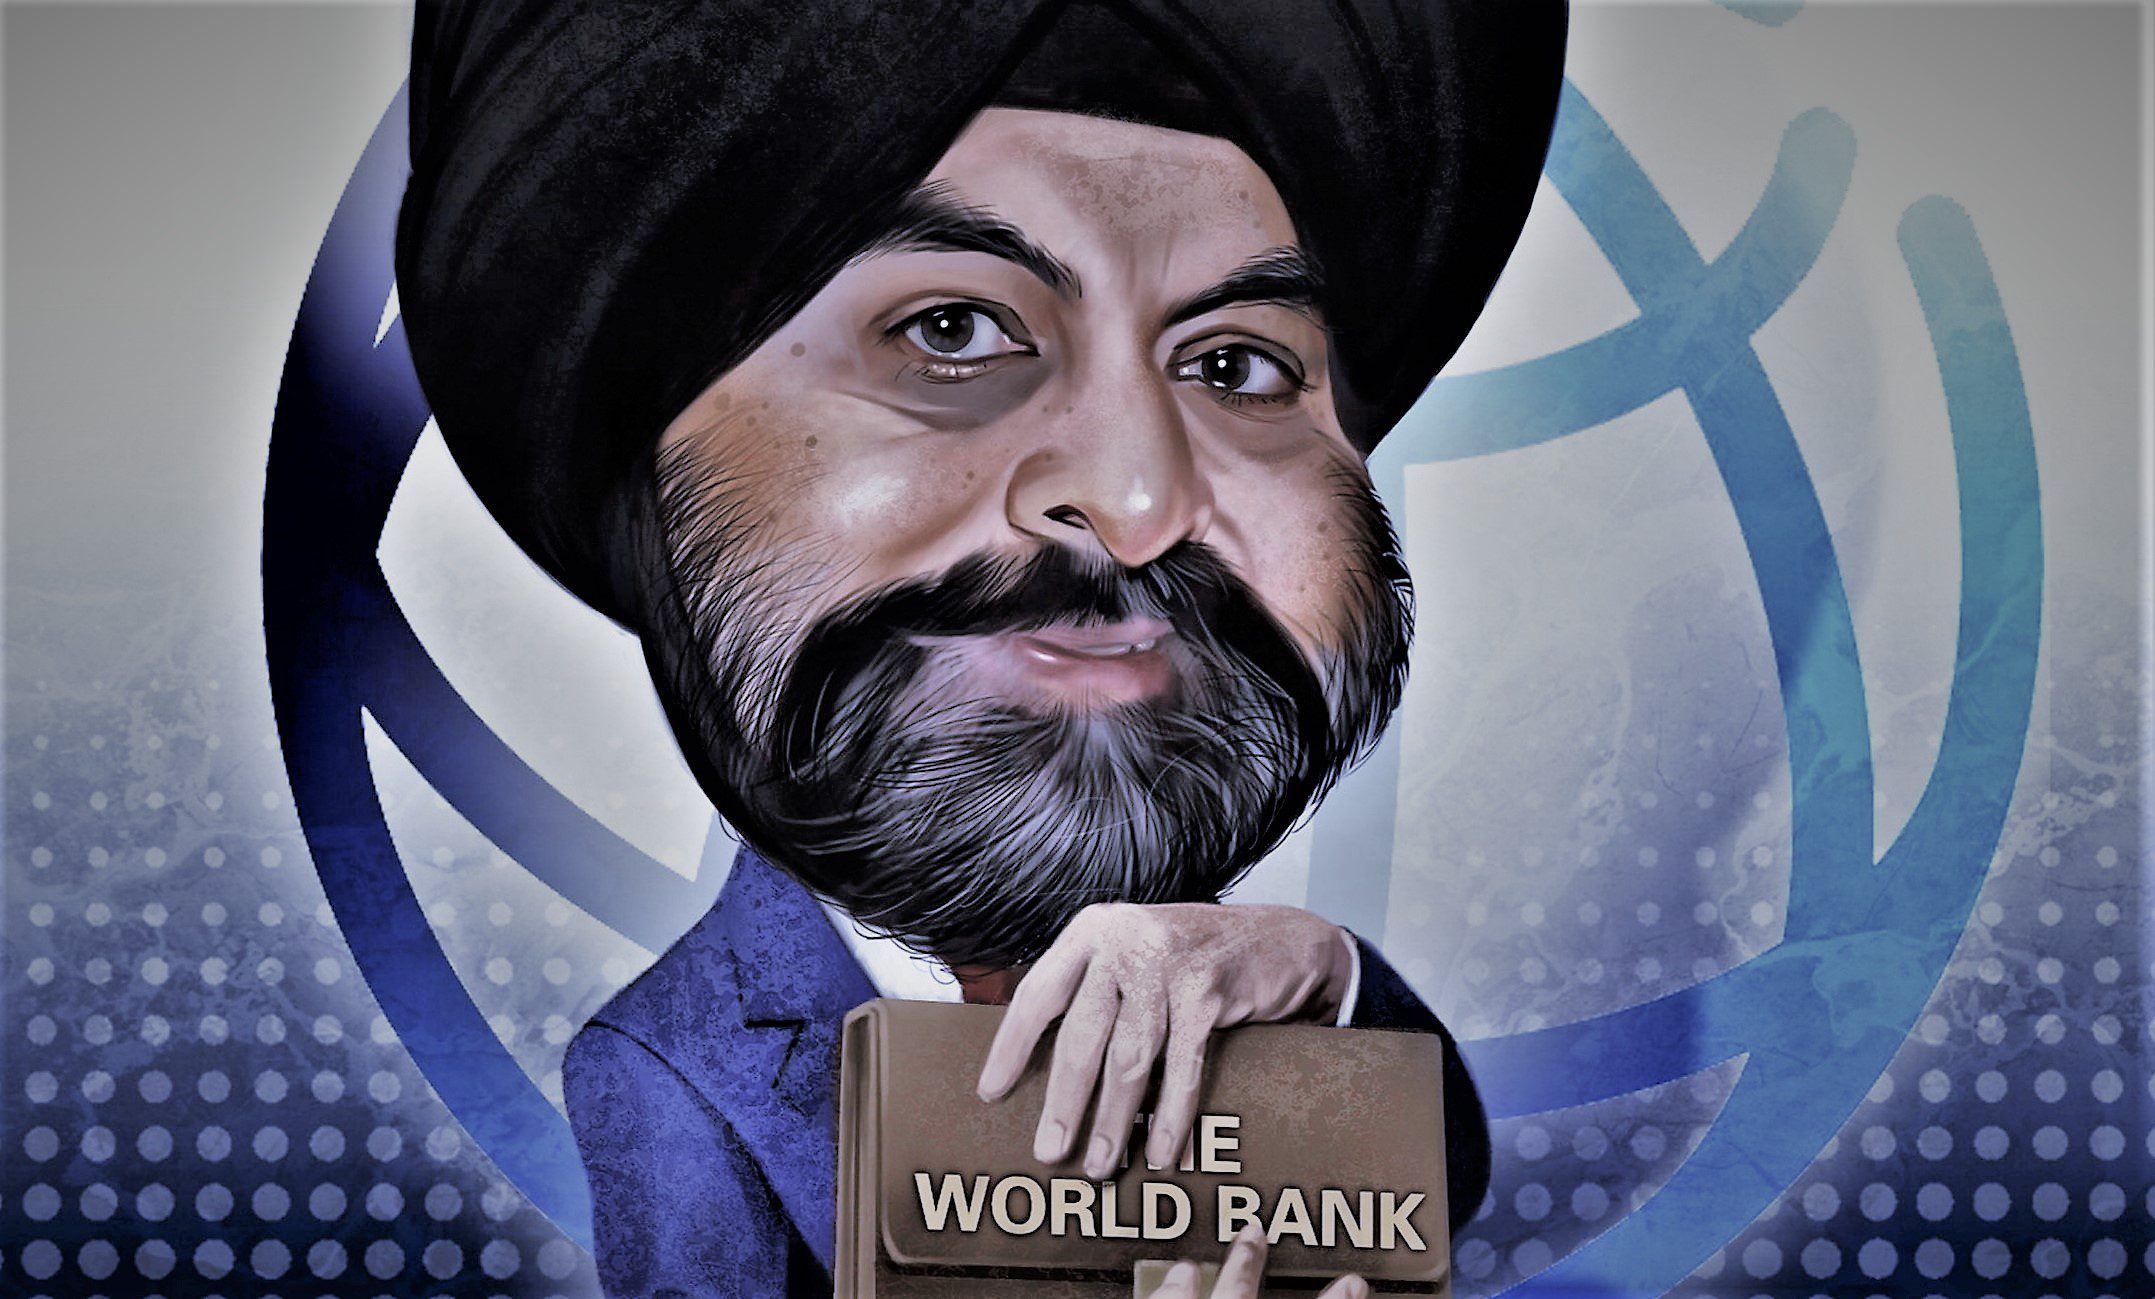 "Breaking Barriers, Inspiring Millions: Ajay Banga's Jurney from India t0 the Pinnacle of the World Bank"